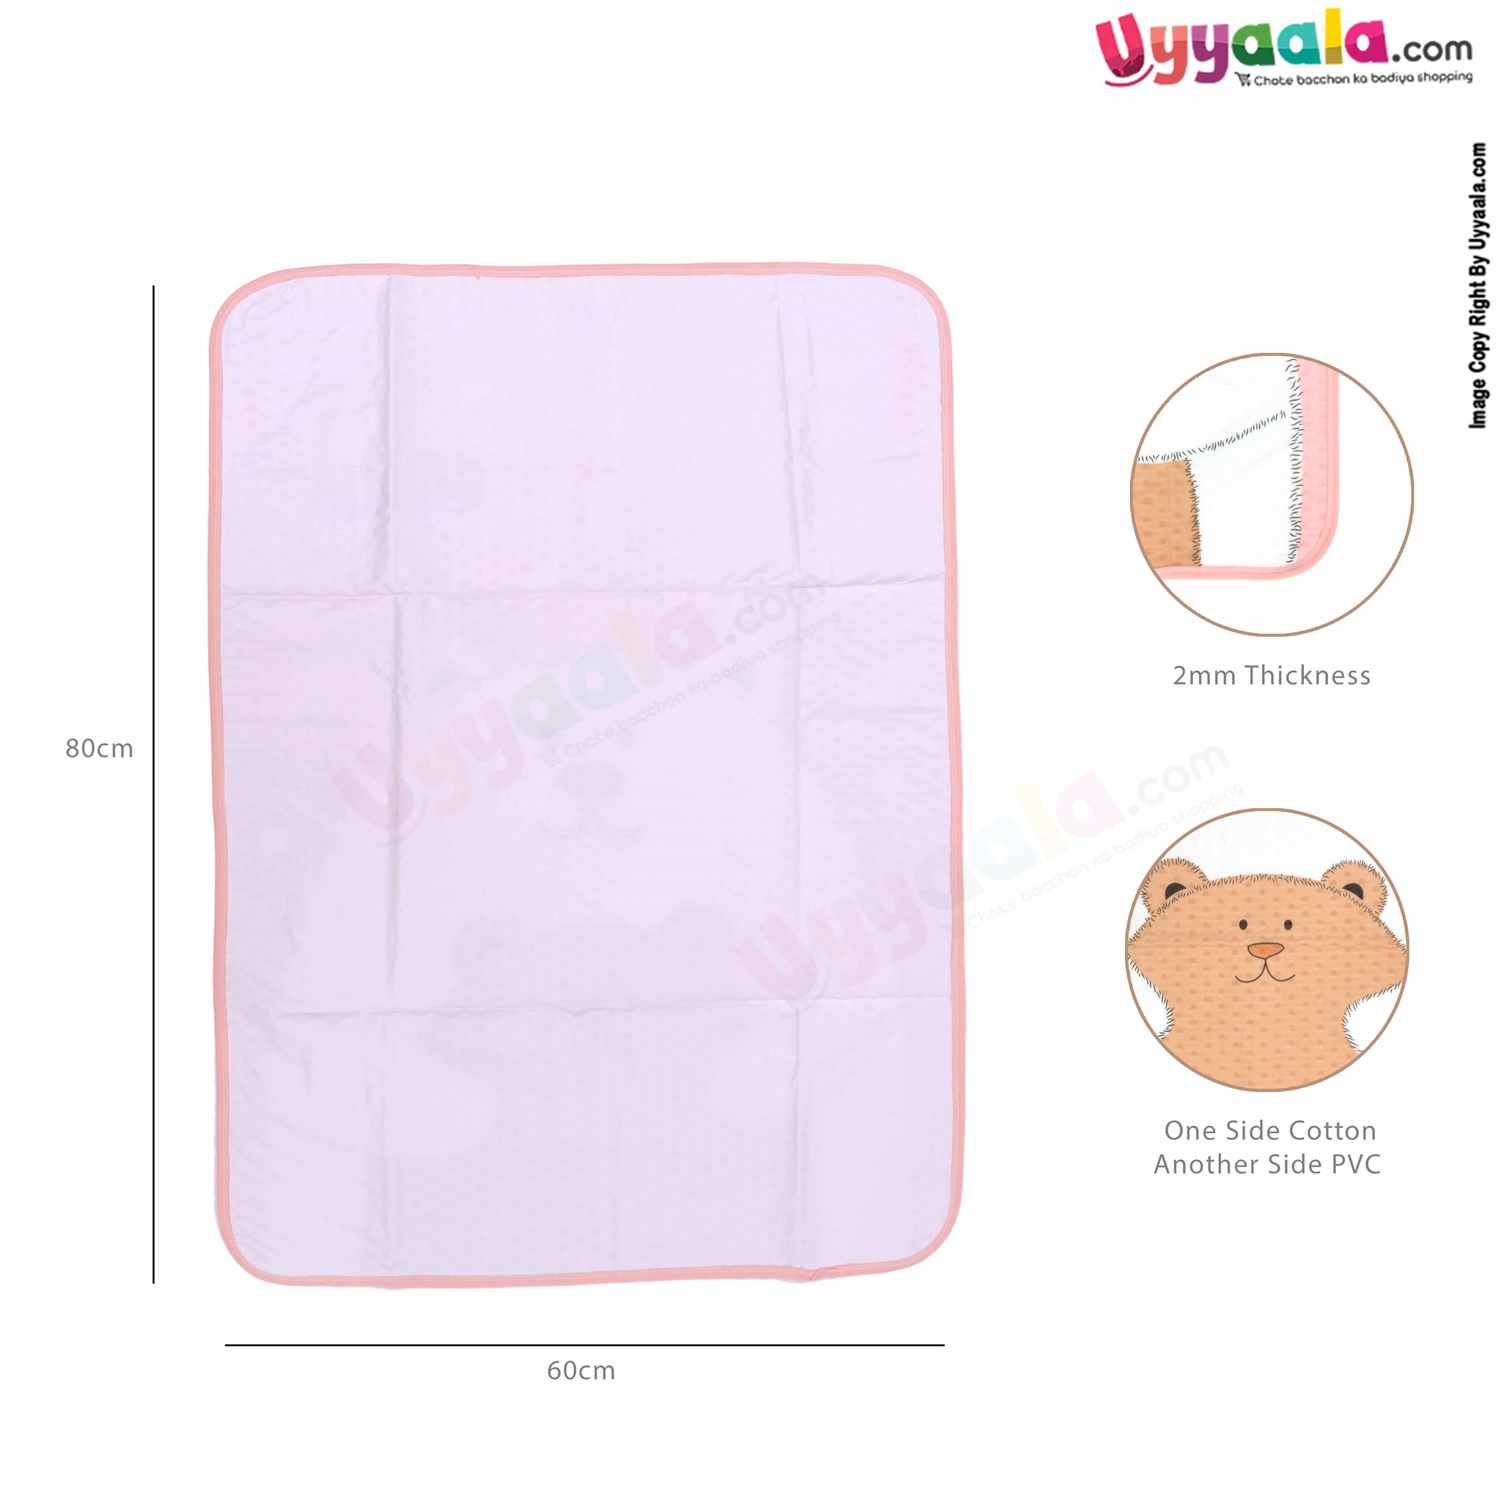 Fancy Premium Baby Mattress Protector Dry Sheet Water Proof, One Side Cotton & Another Side PVC for Babies with Bear Print, Medium Size(80*60cm)